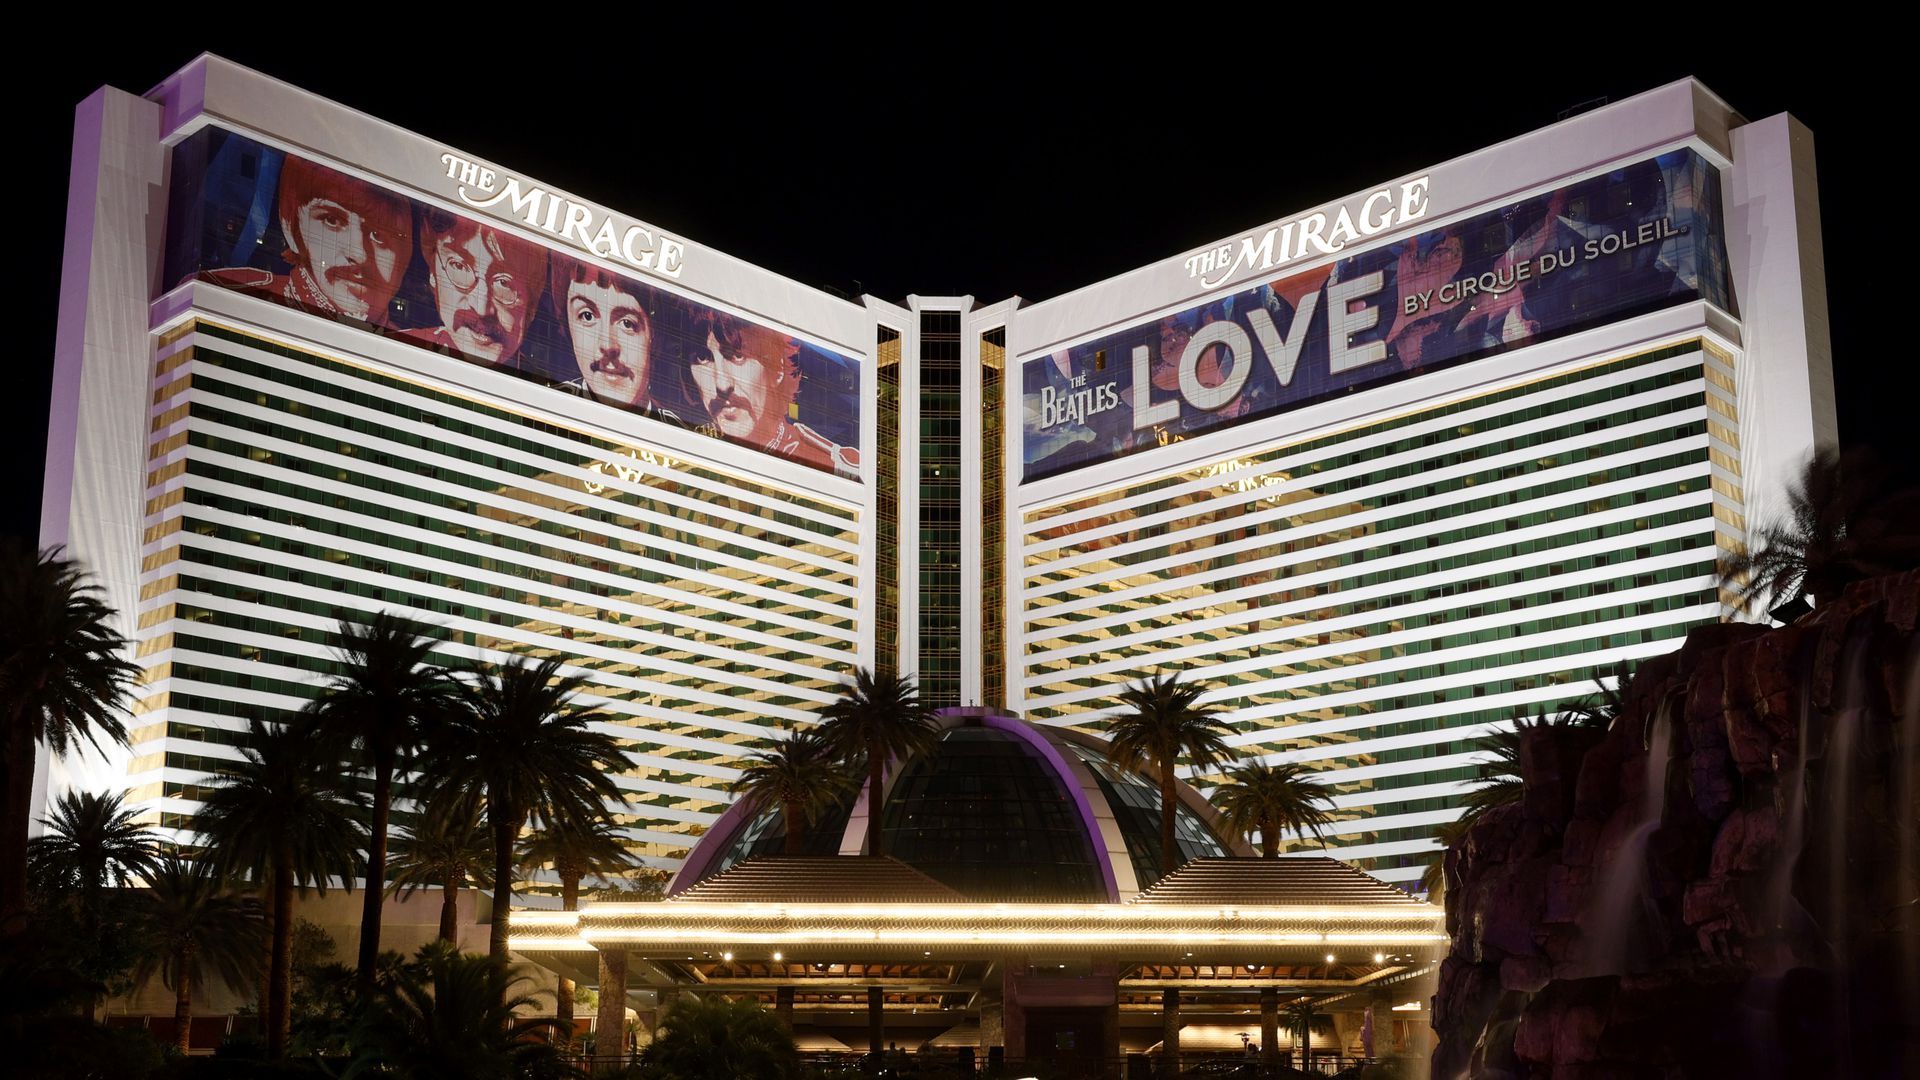 Picture of the Mirage casino with pictures of the Beatles at the top